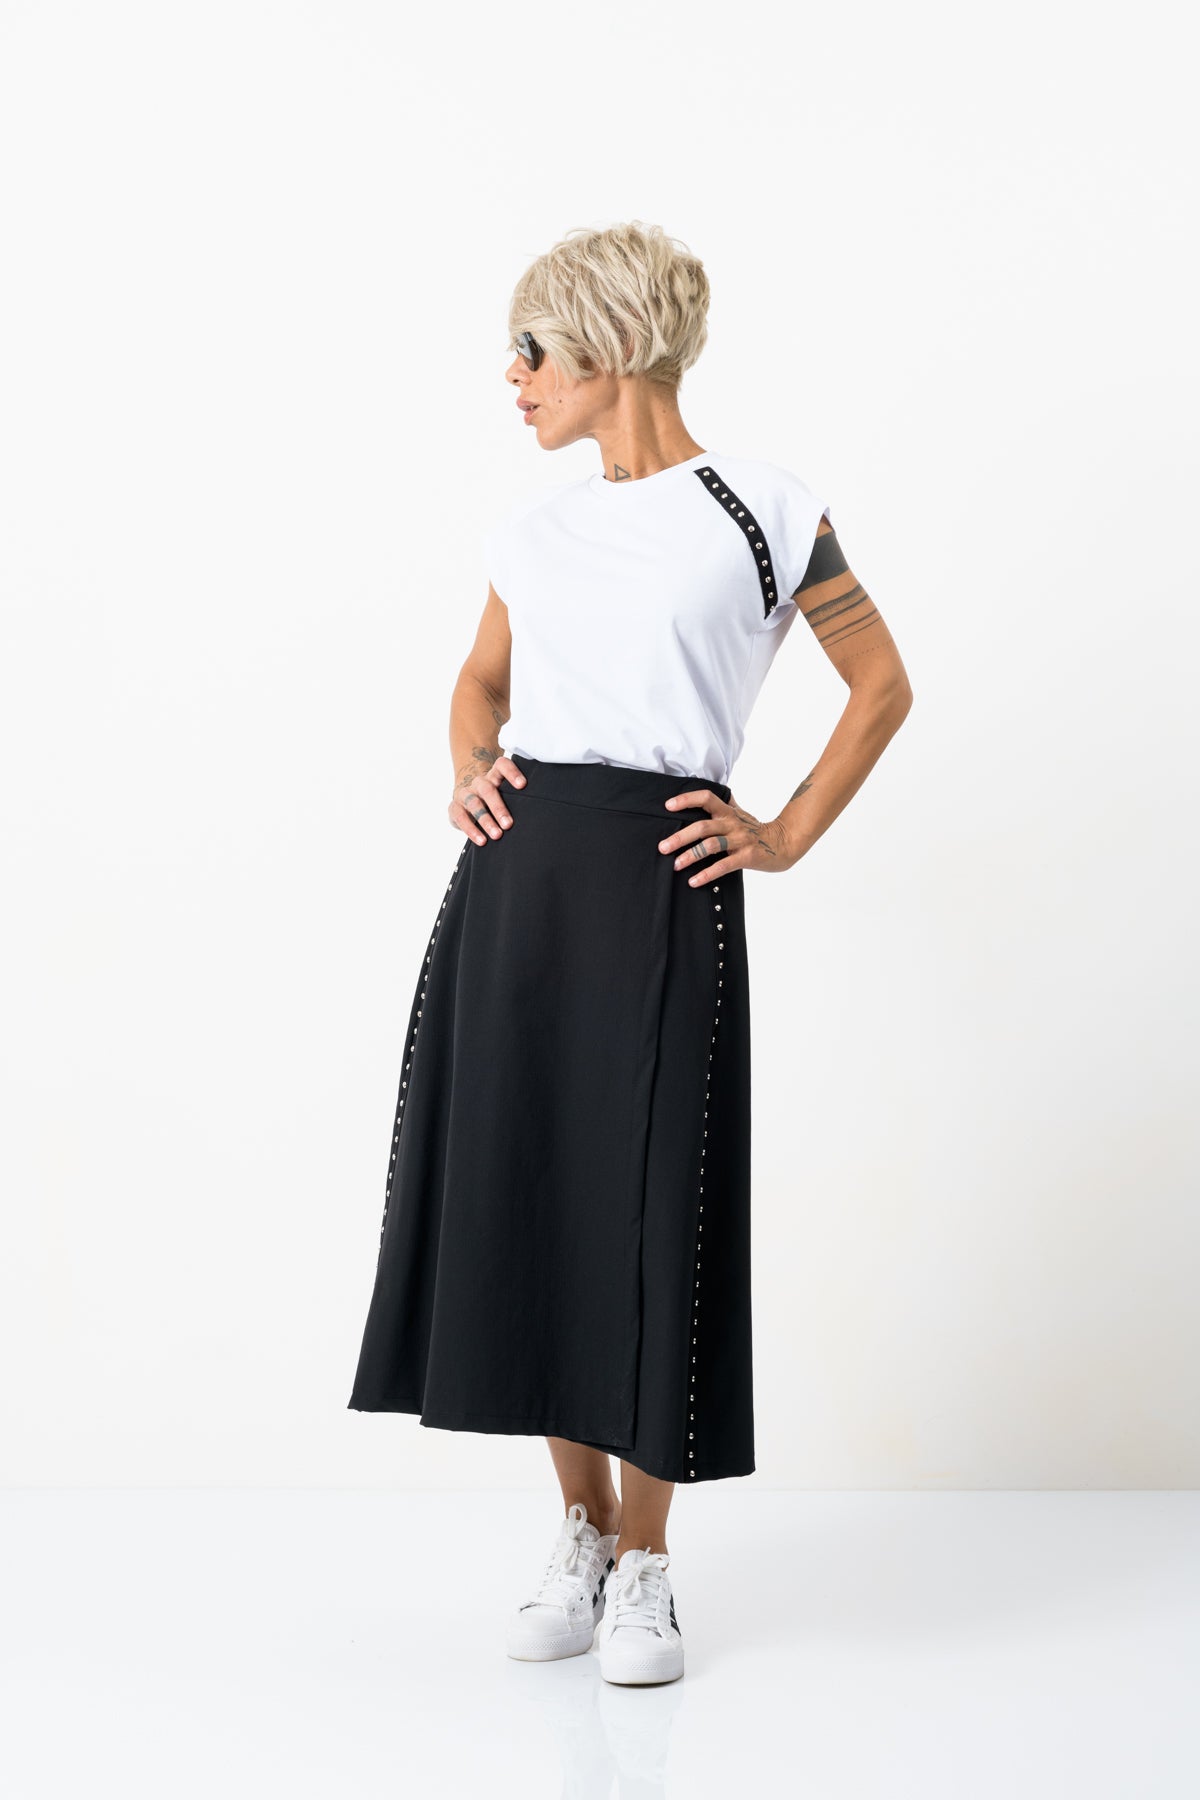 White T Shirt and Black Midcalf Skirt – Clothes By Locker Room